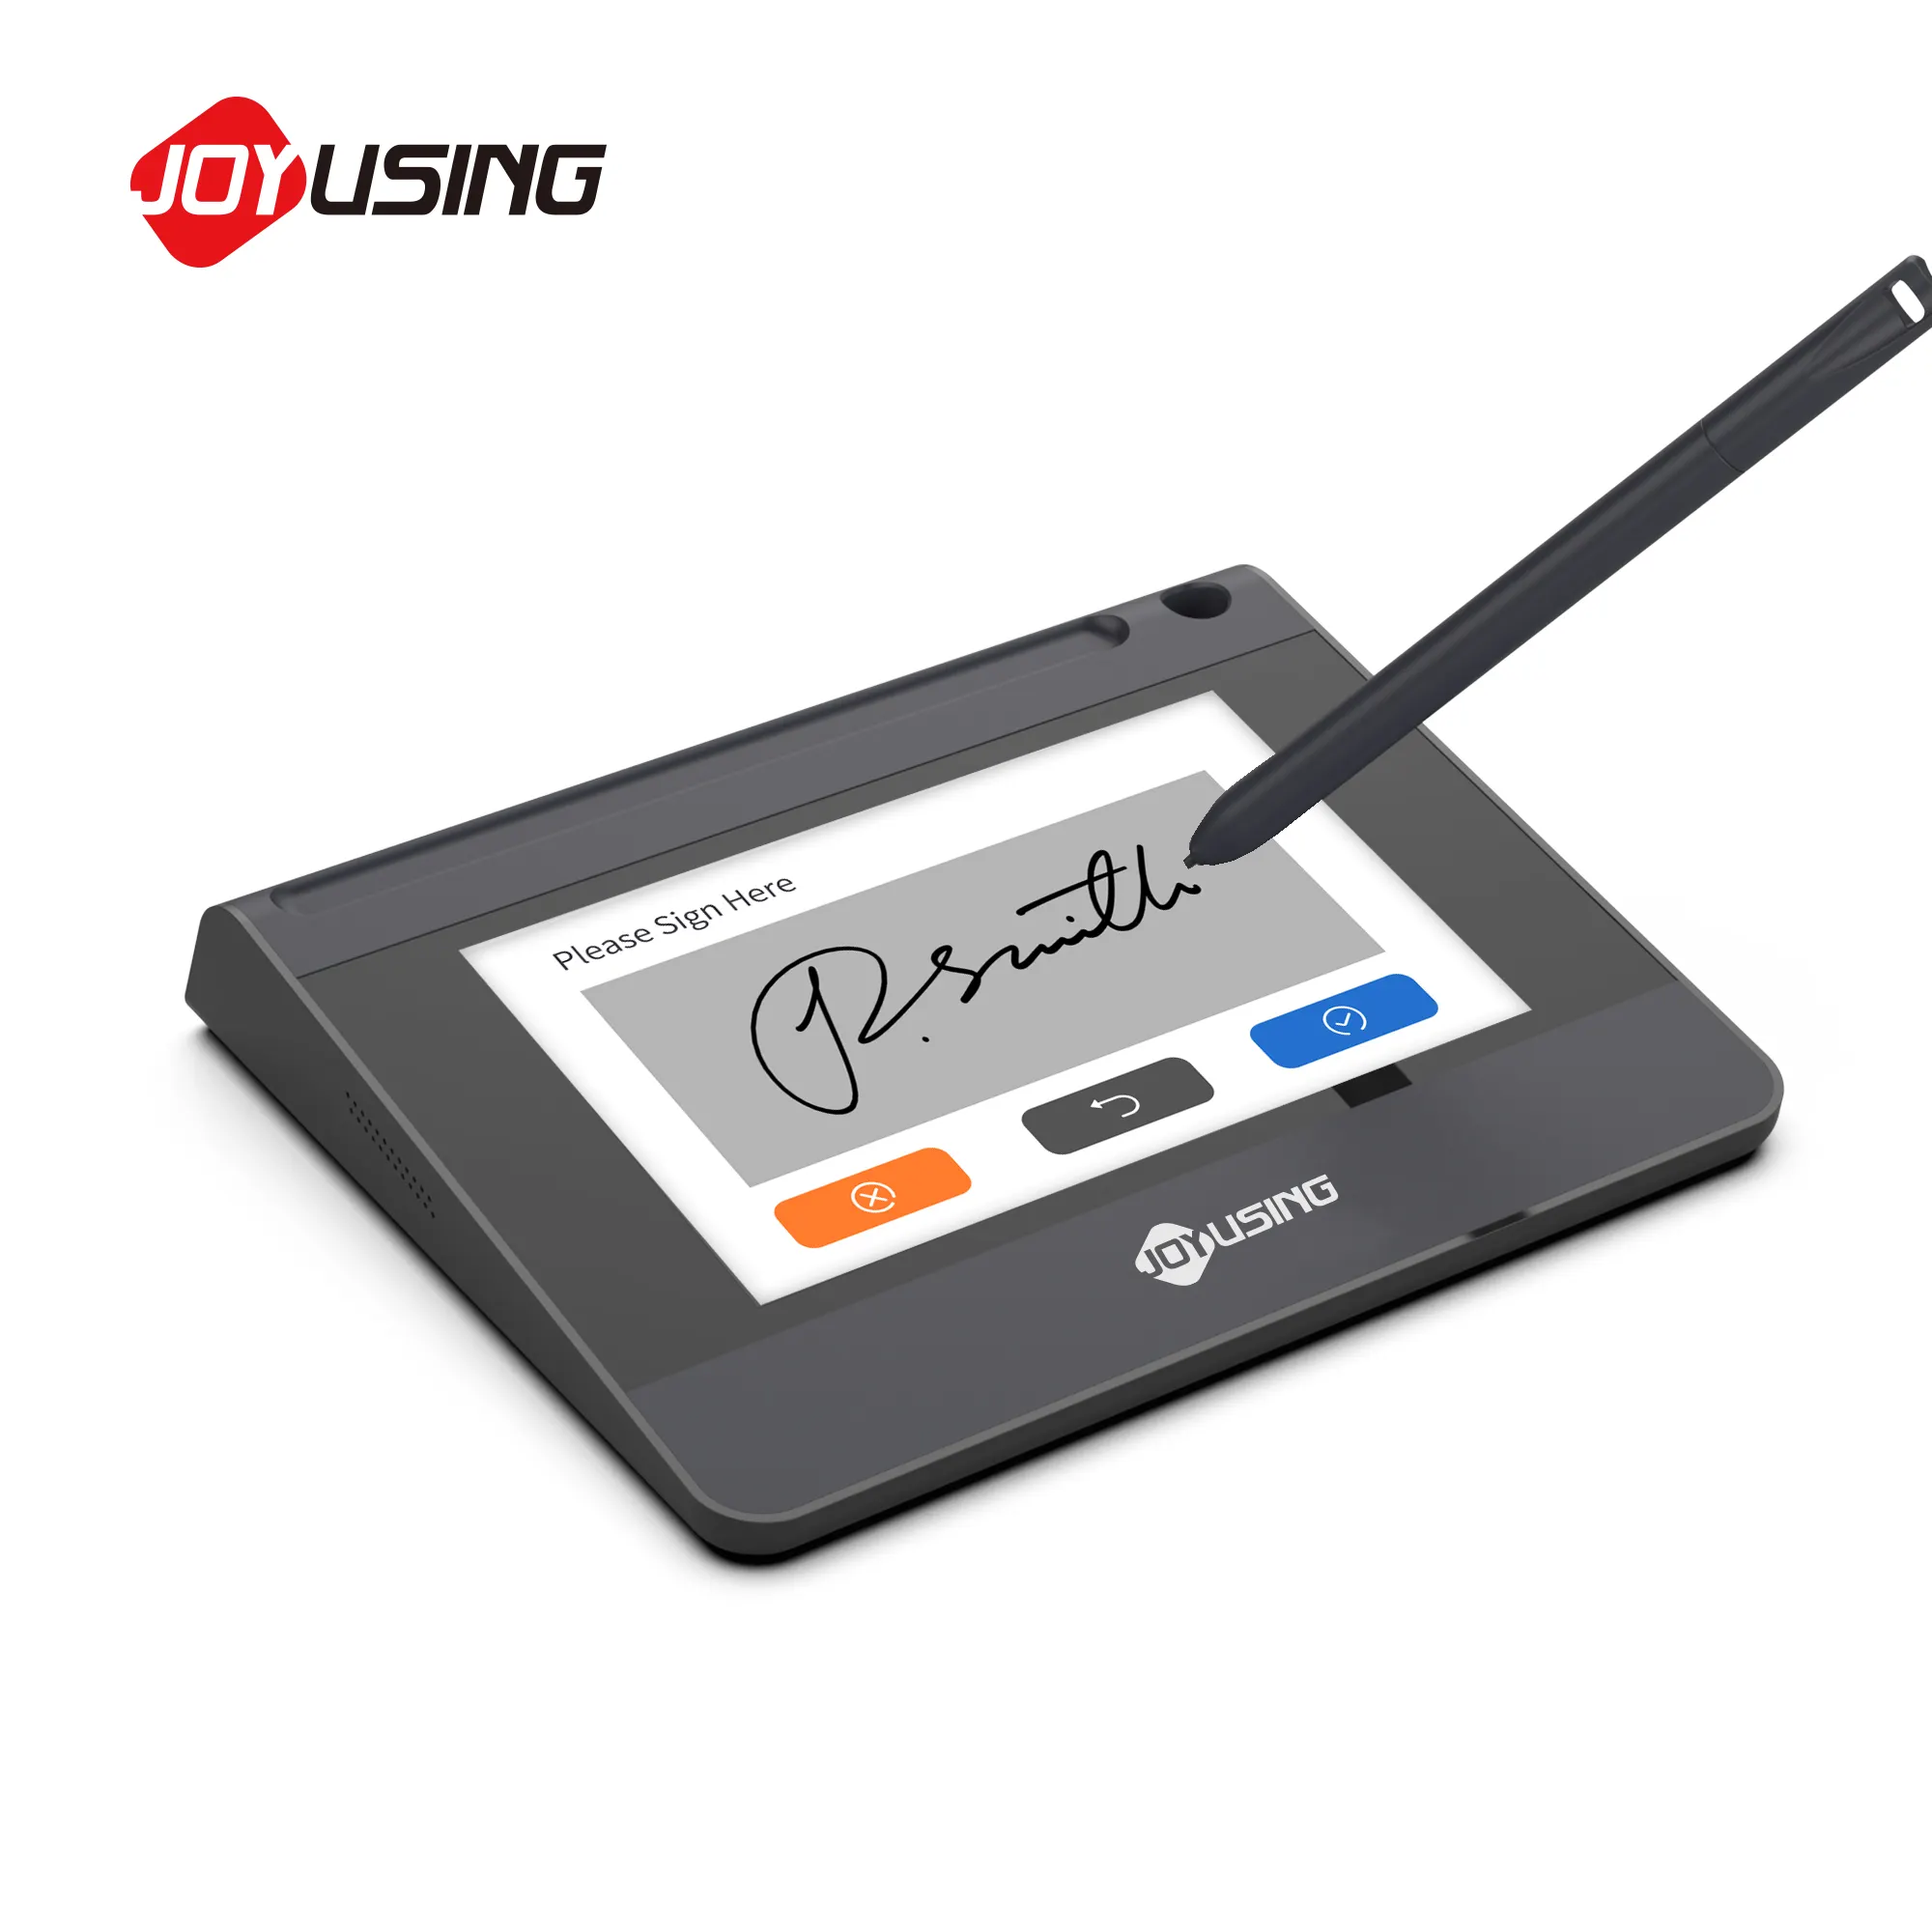 Joyusing Sp550 Electronic Signature Pad High Security Oem Cheap Writing Pad With Large Screen For Multi-Purpose Verification